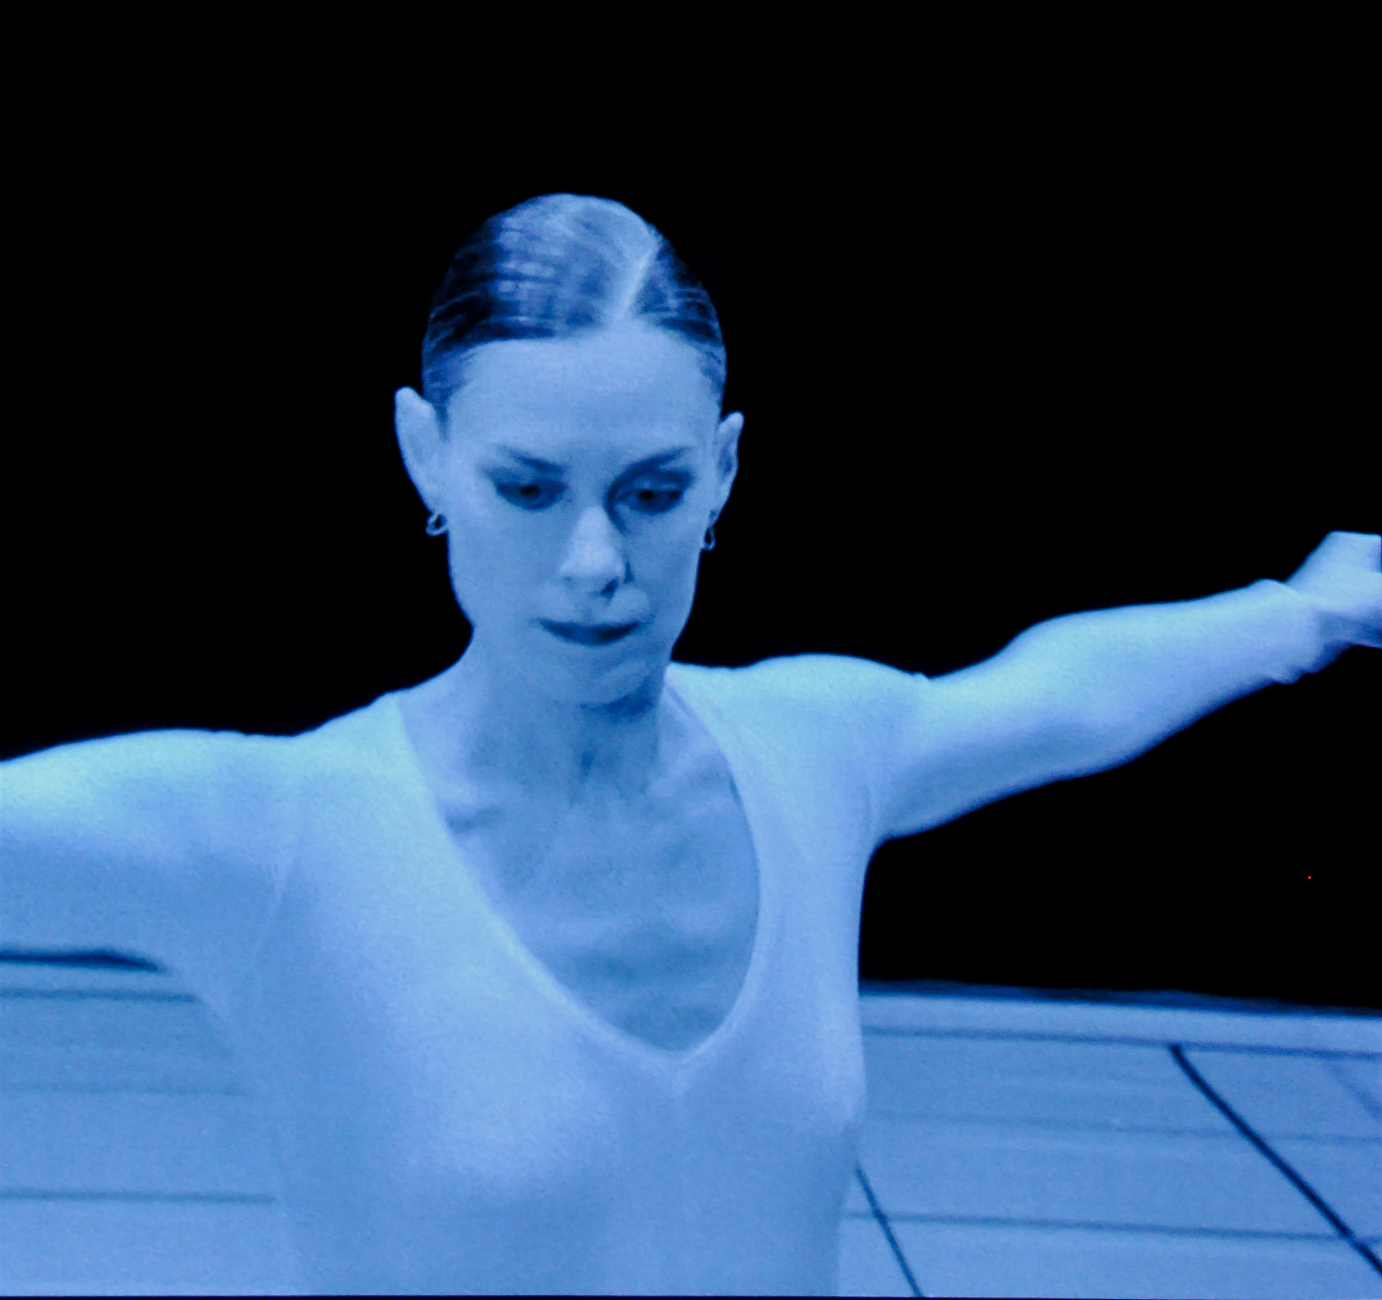 A film still of Lucinda Childs. Her arms are outstretched.